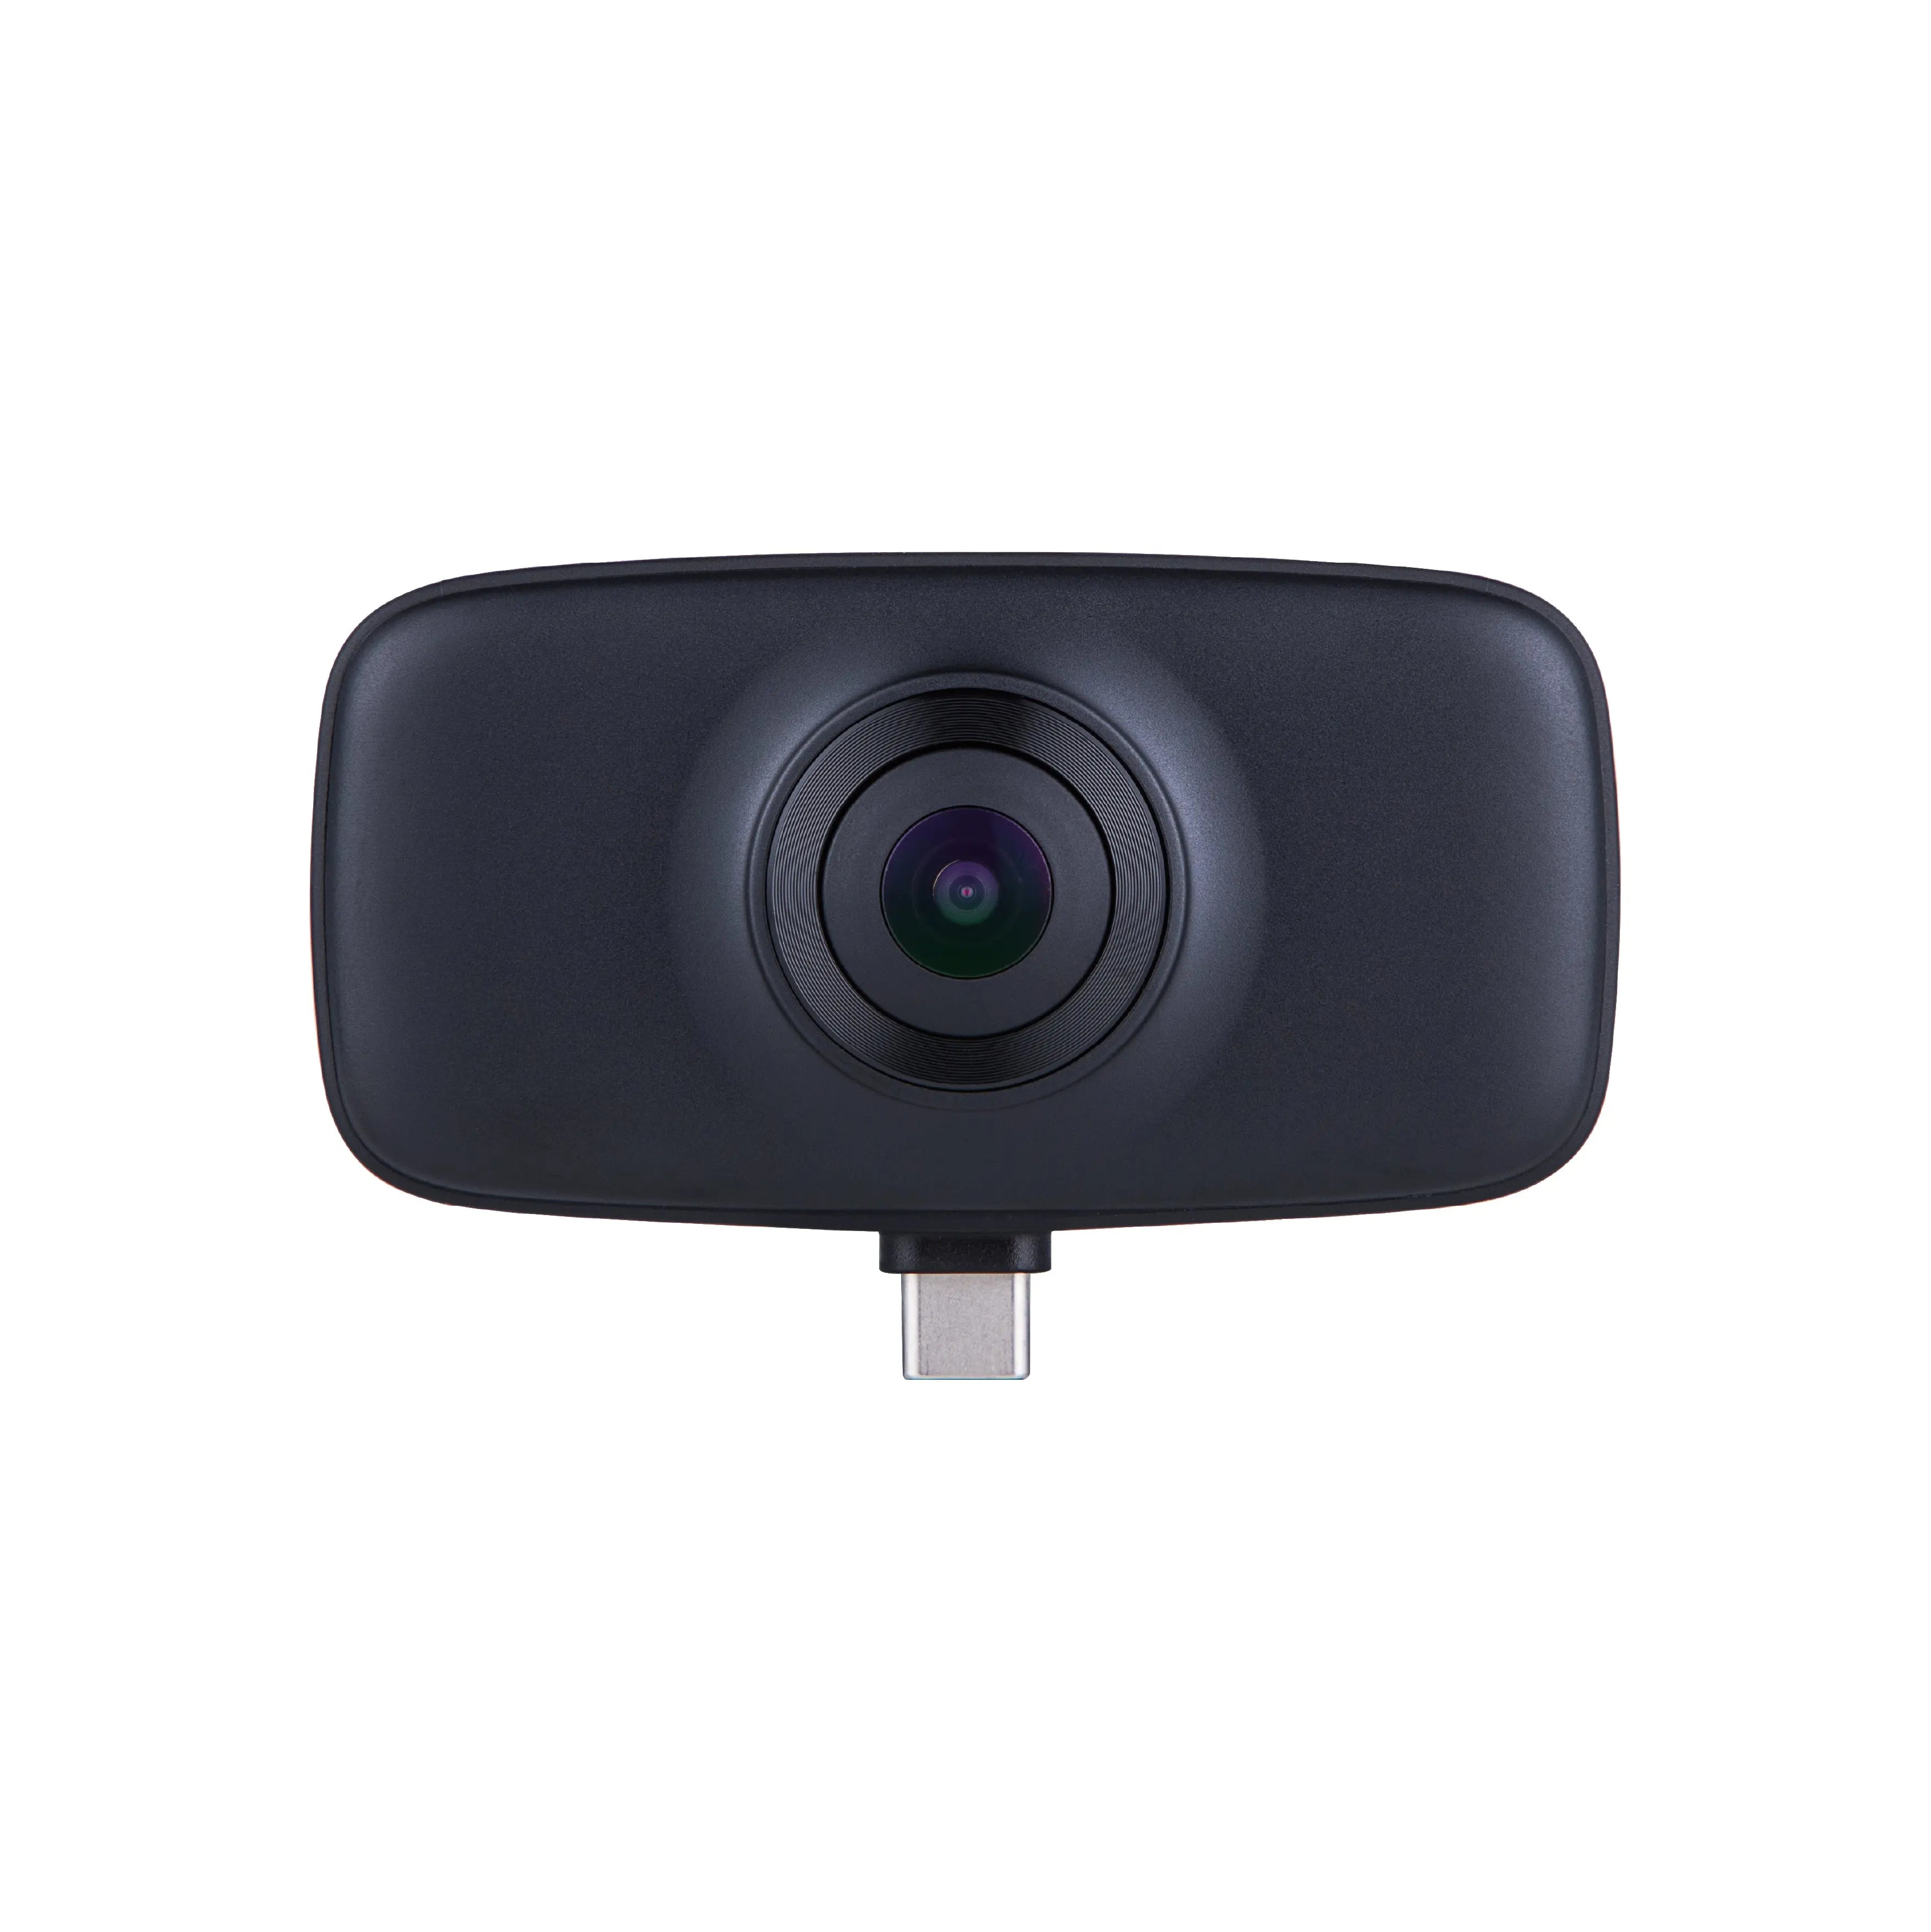 QooCam Fun Camera with Social Media Live Recording and 360 Full View Picture Capability7